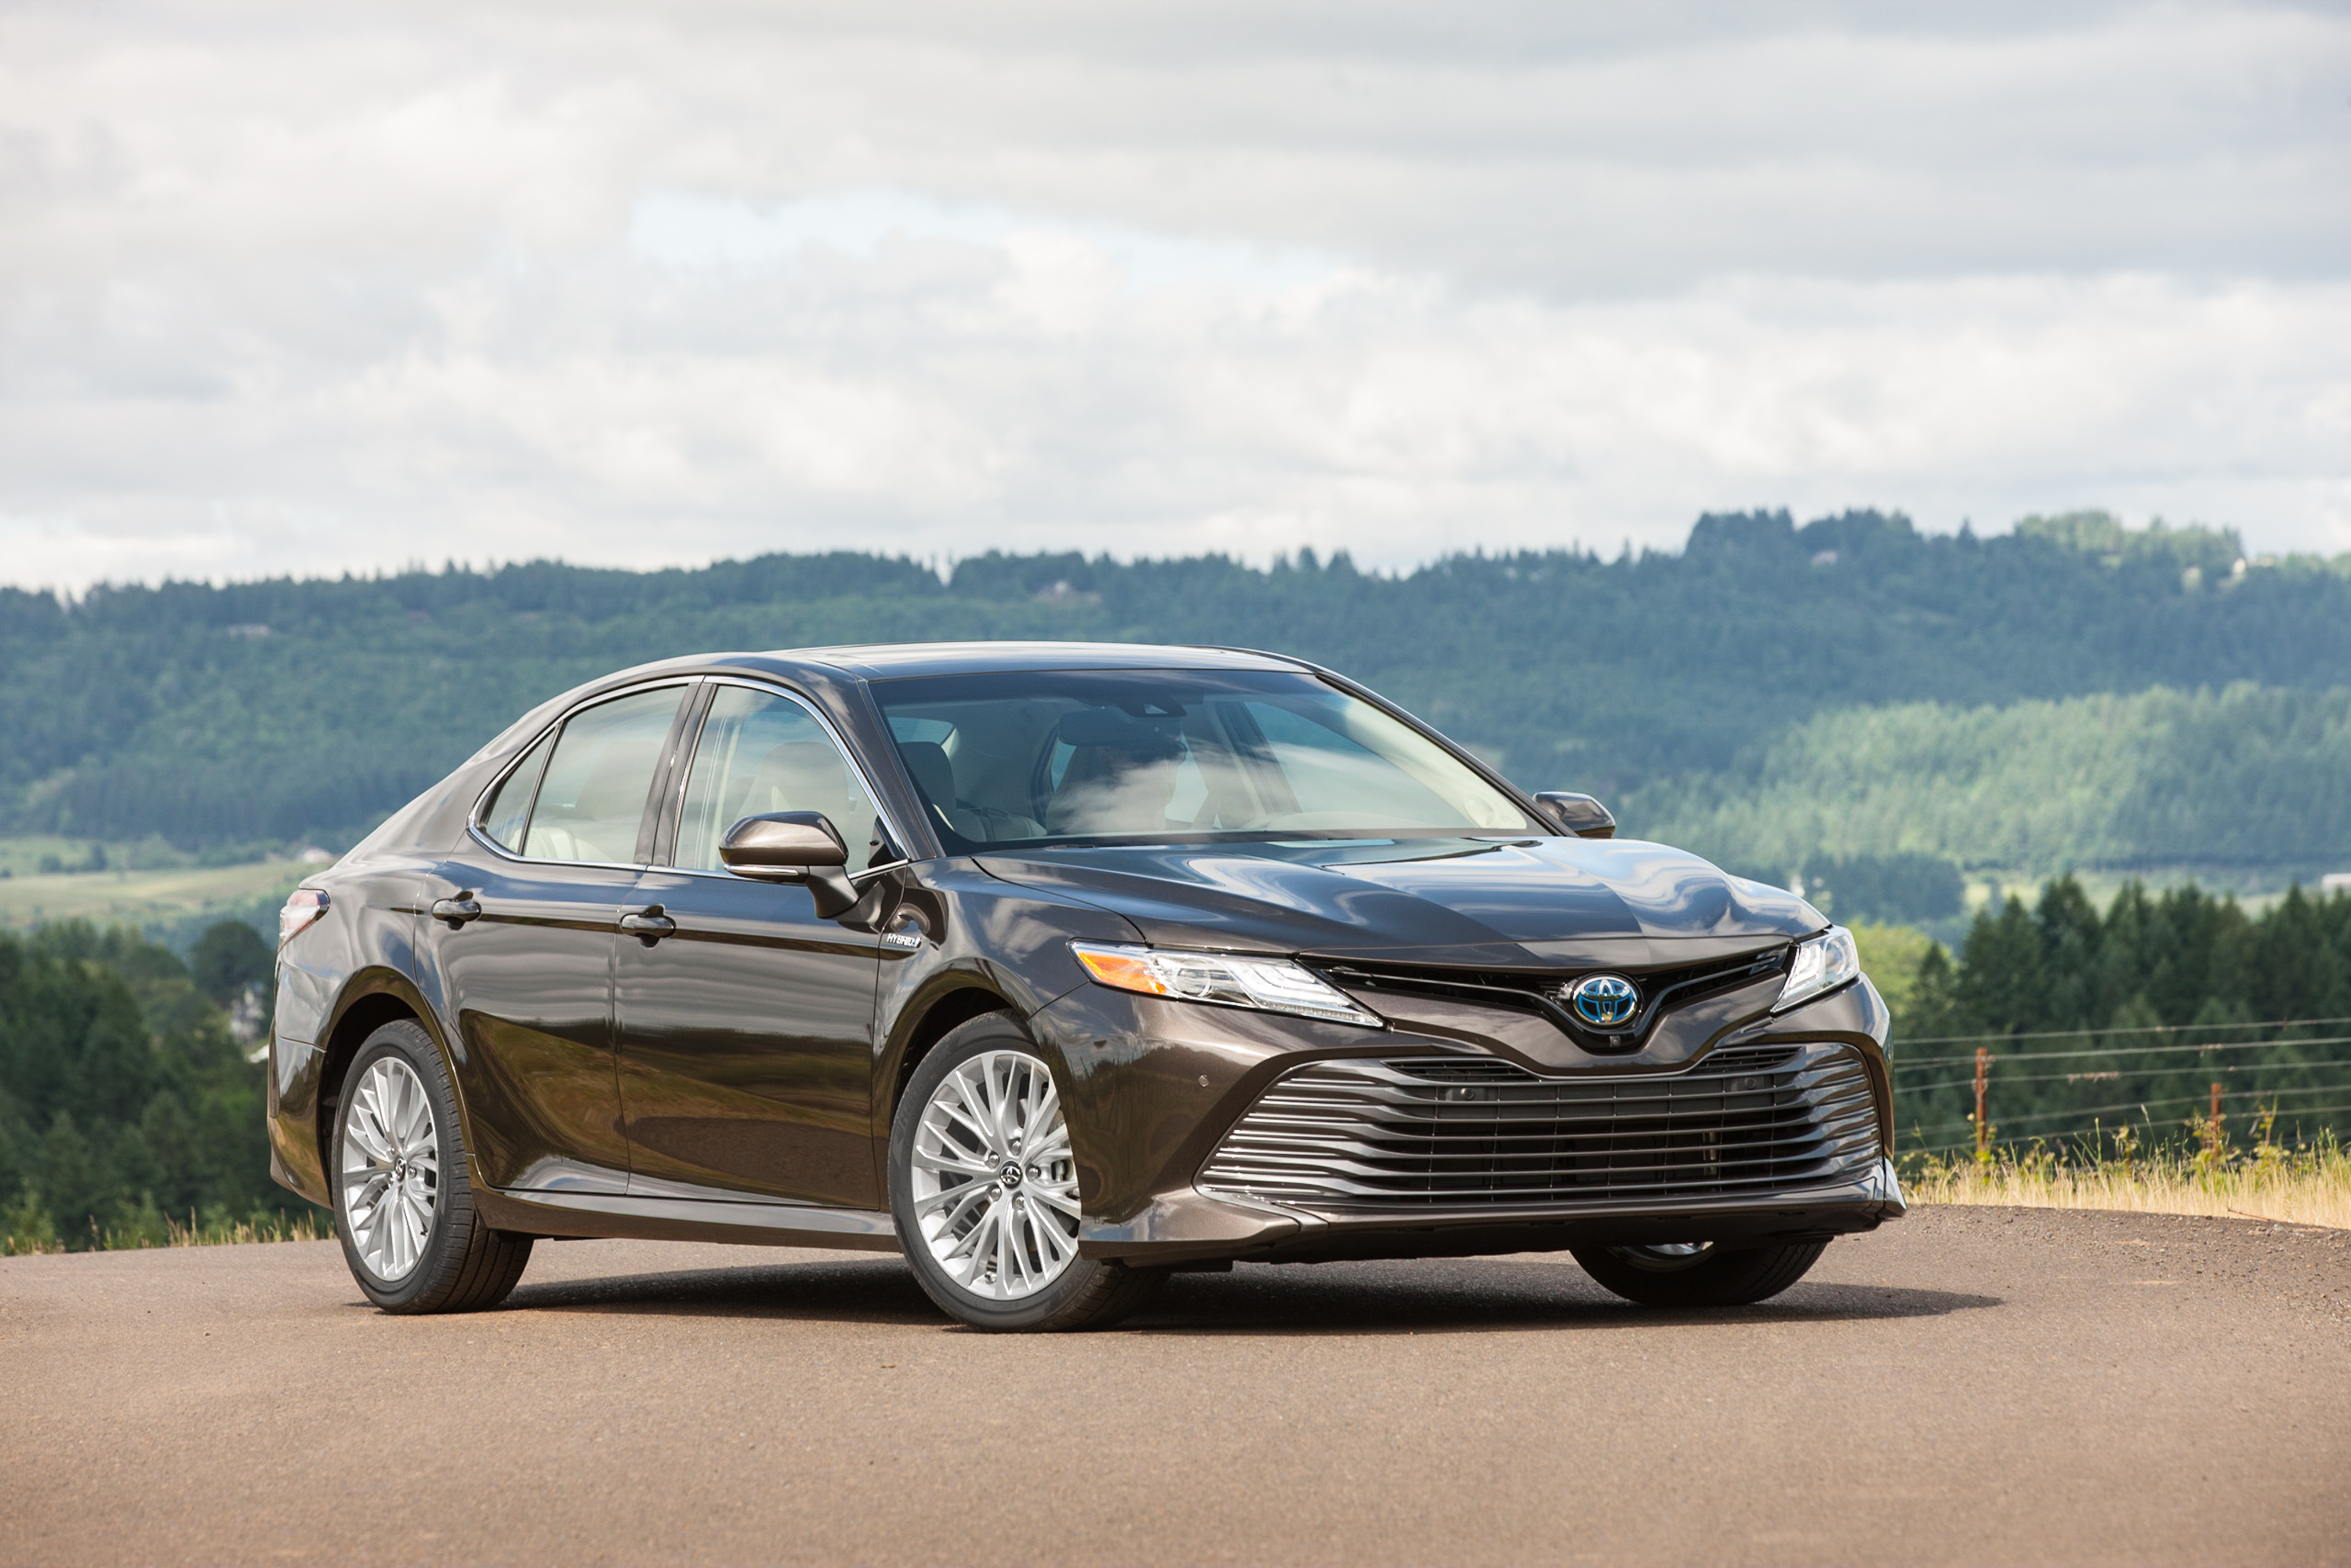 <p>We will be witnessing the launch of the all--new Toyota Camry today. And we&#39;ll be bringing you real-time updates as they occur. Stay tuned to this page, and don&#39;t forget to check our social media too.</p>